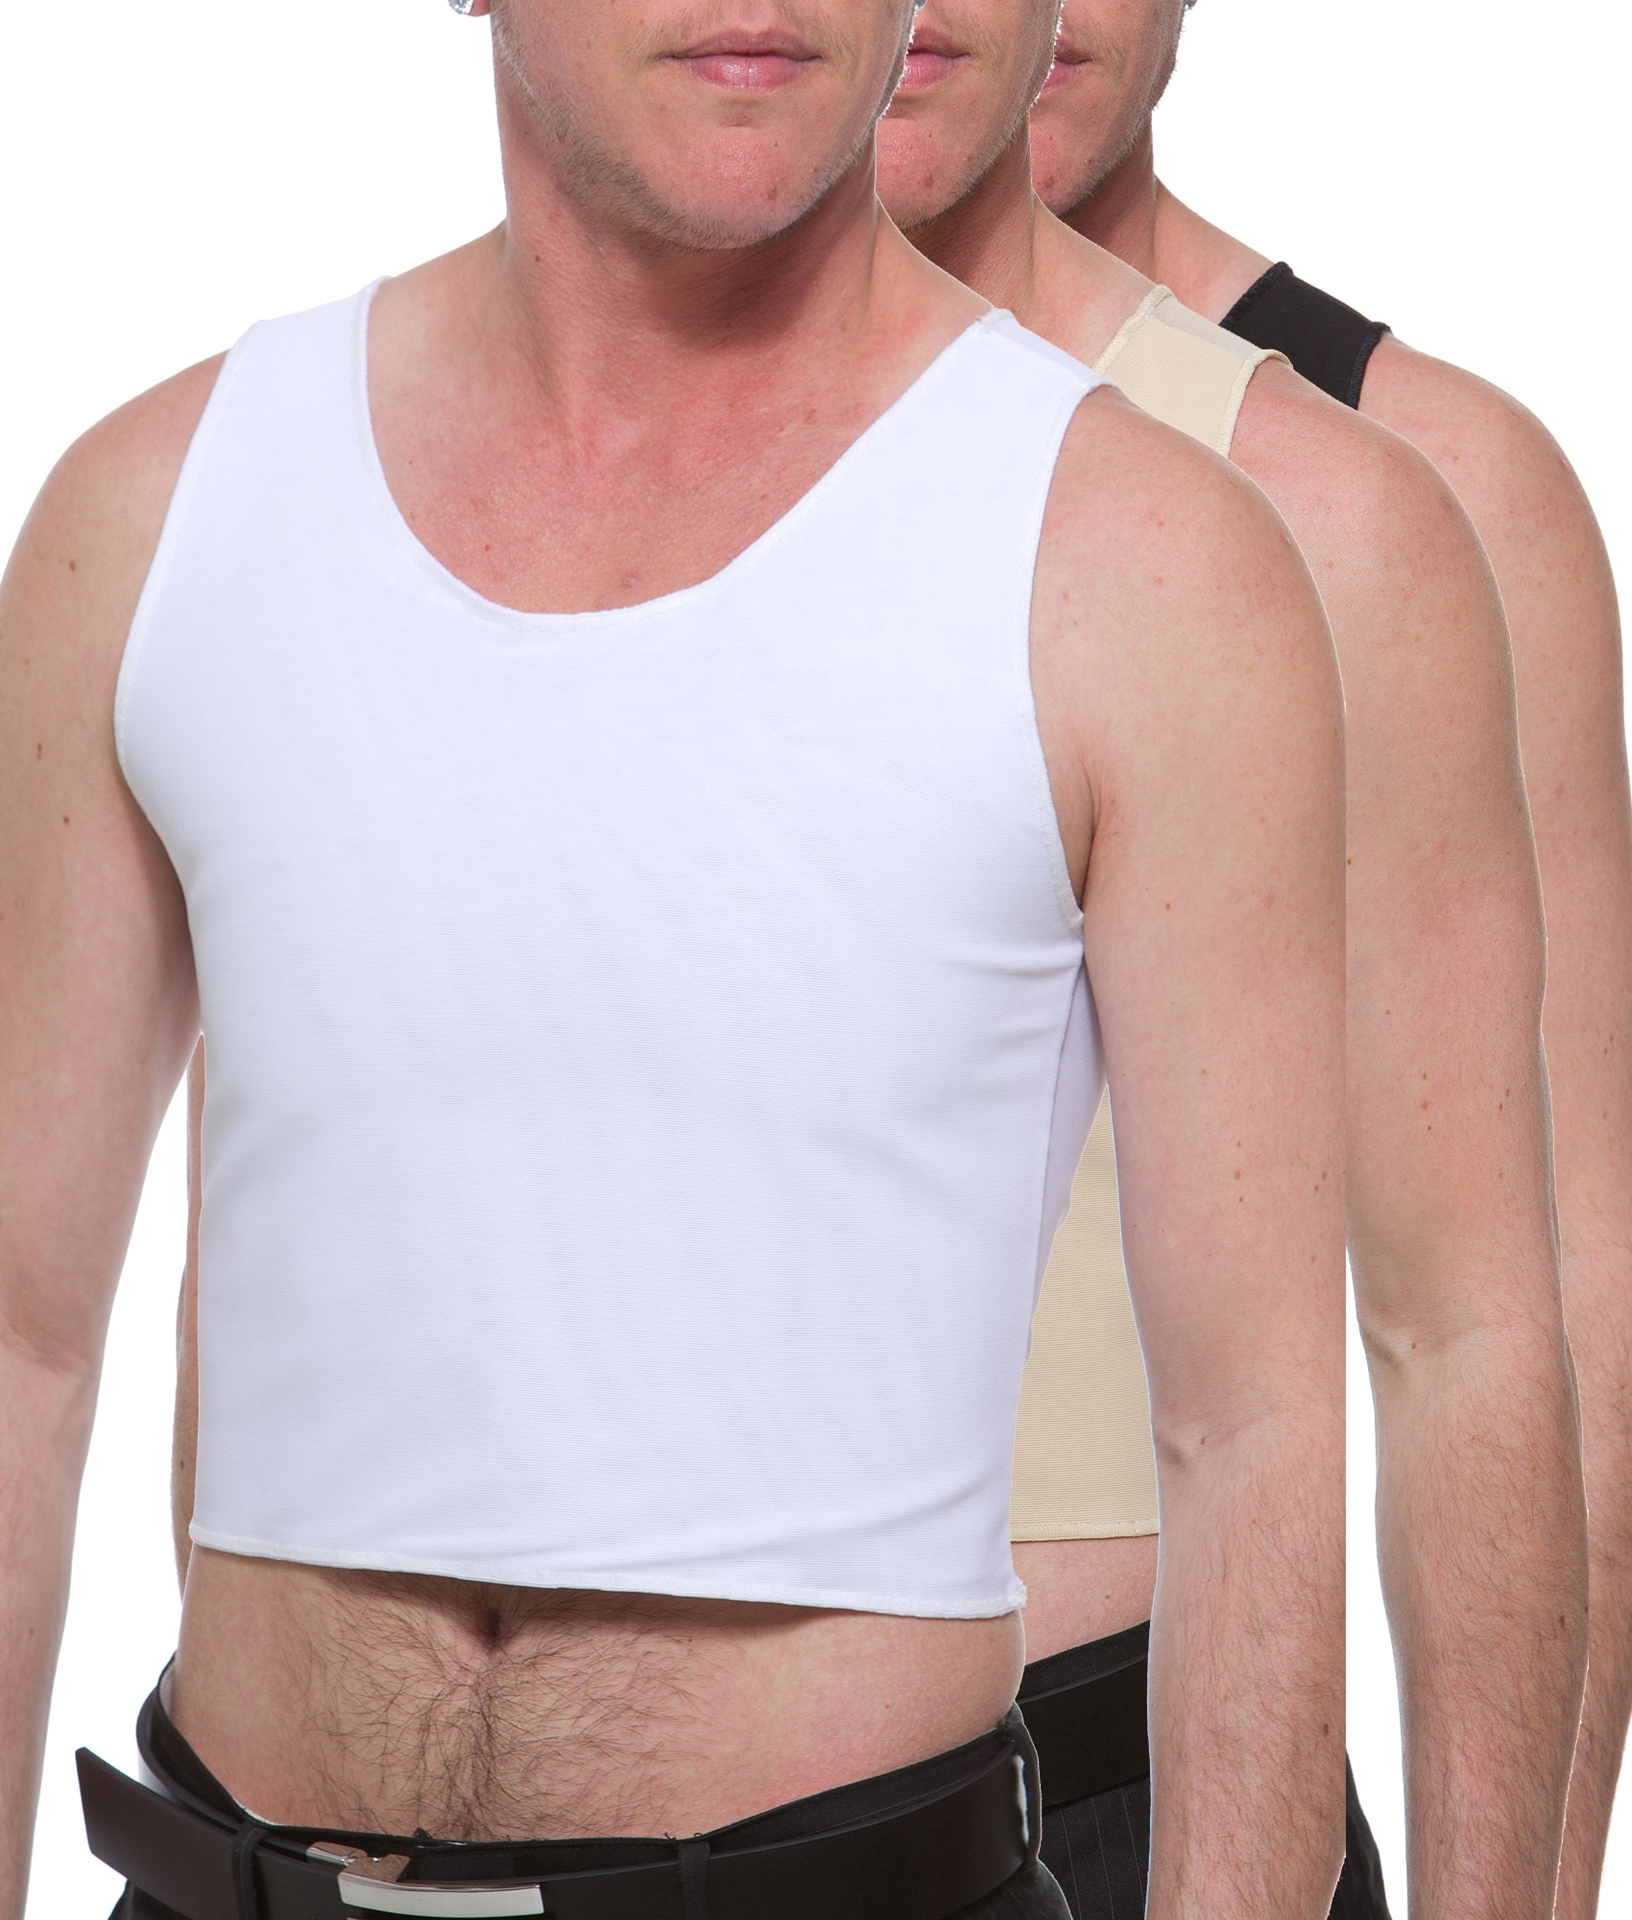 Underworks Extreme Compression Tri-top Chest Binder for FTM and Cosplay.  FTM Chest Binders for Trans Men by Underworks